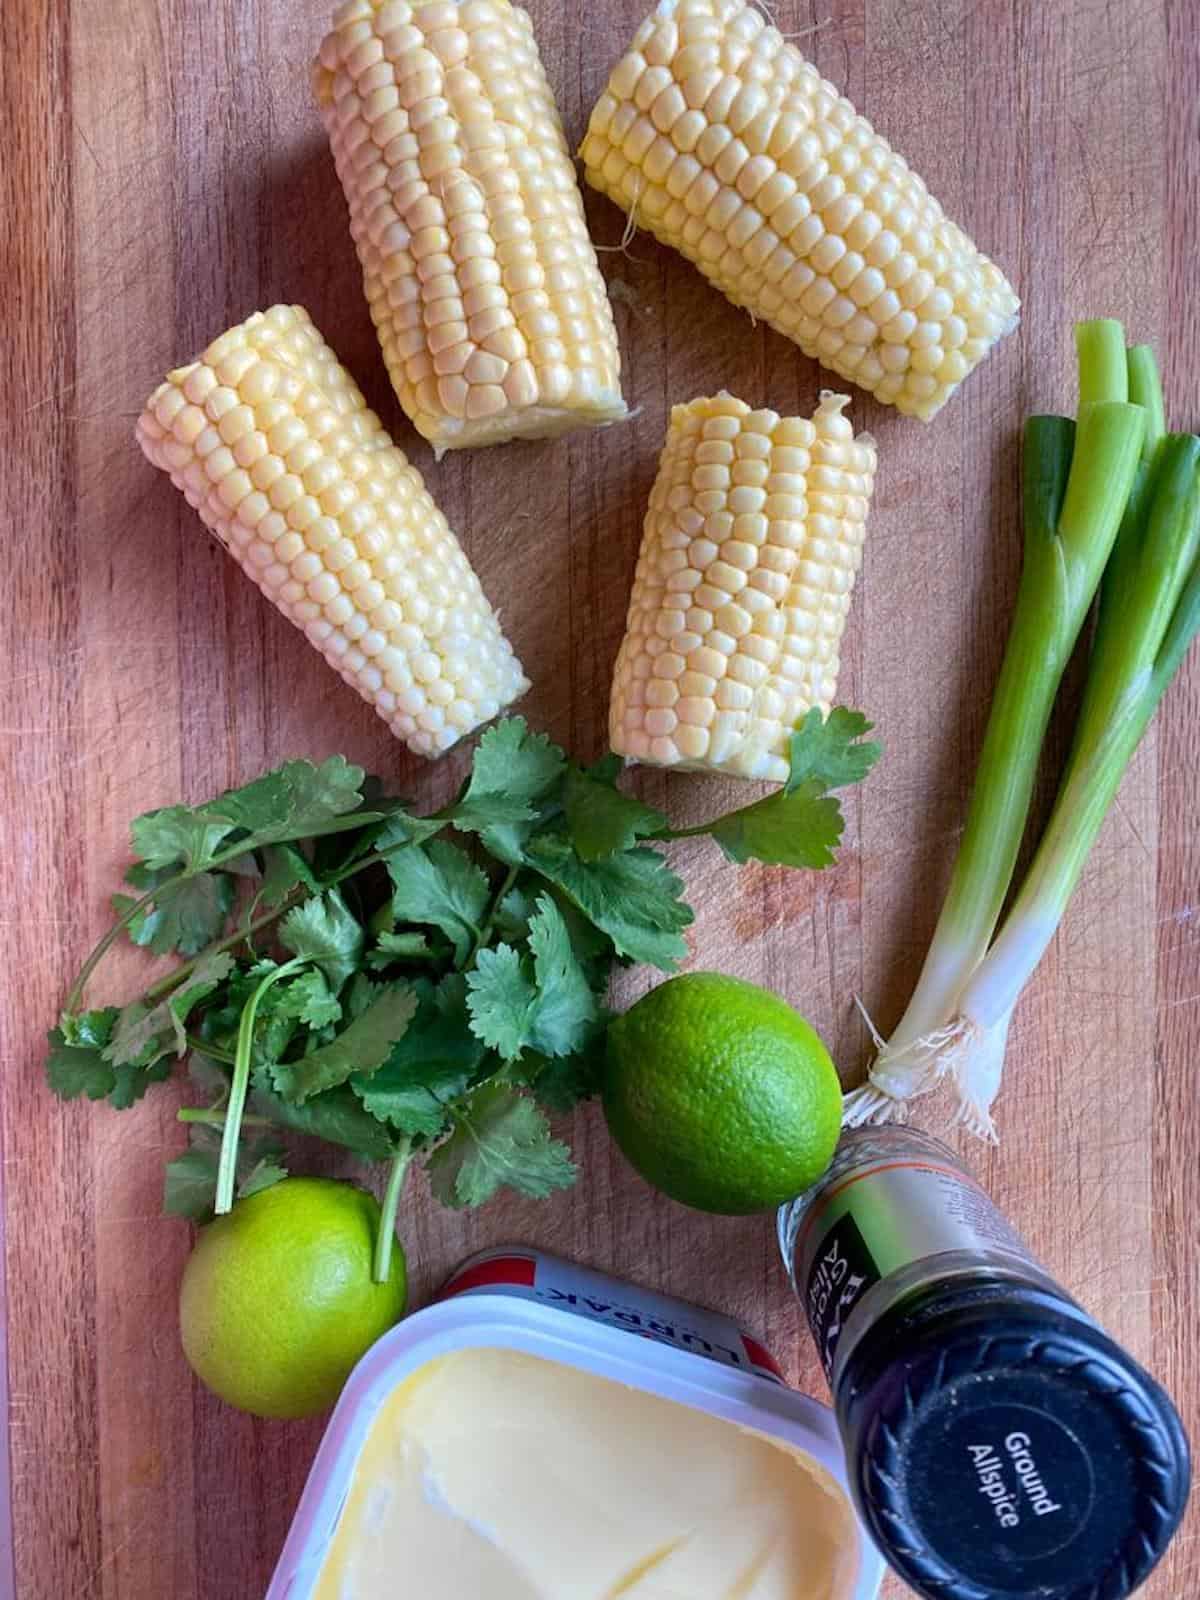 ingredients for buttered sweet corn with spiced compound butter